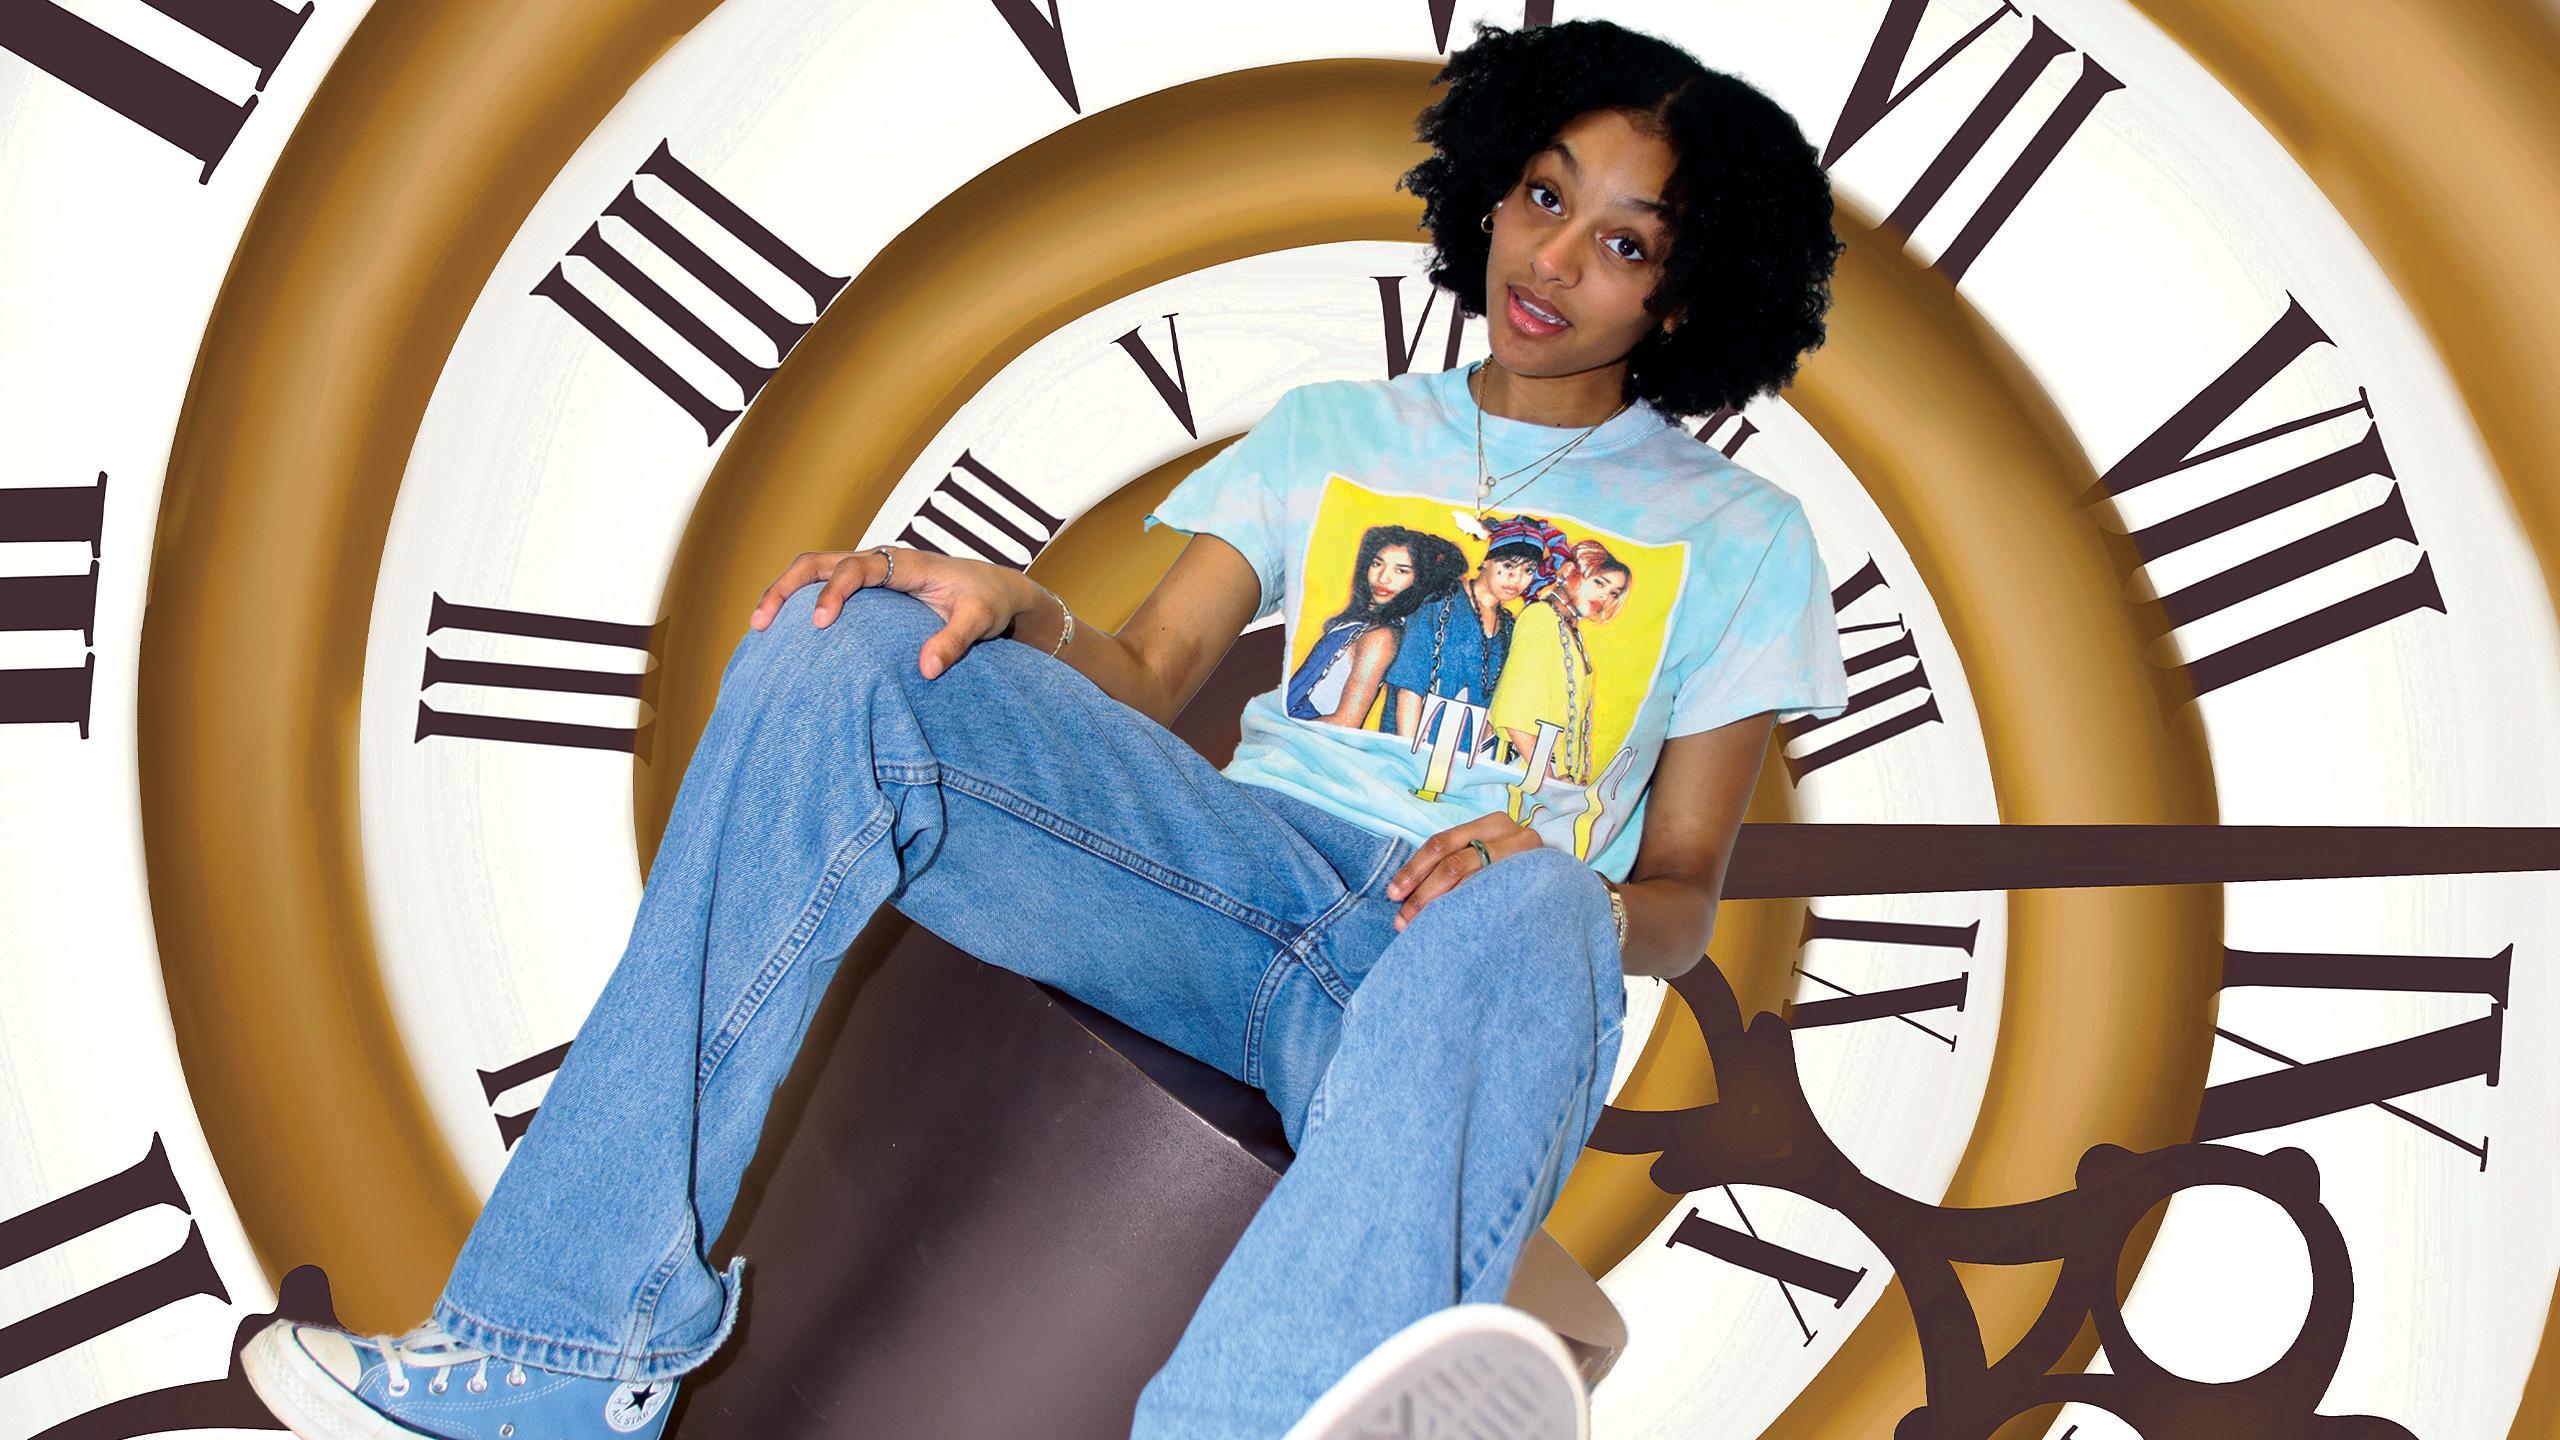 an image of shaylin sitting with a spiraling clock behind her